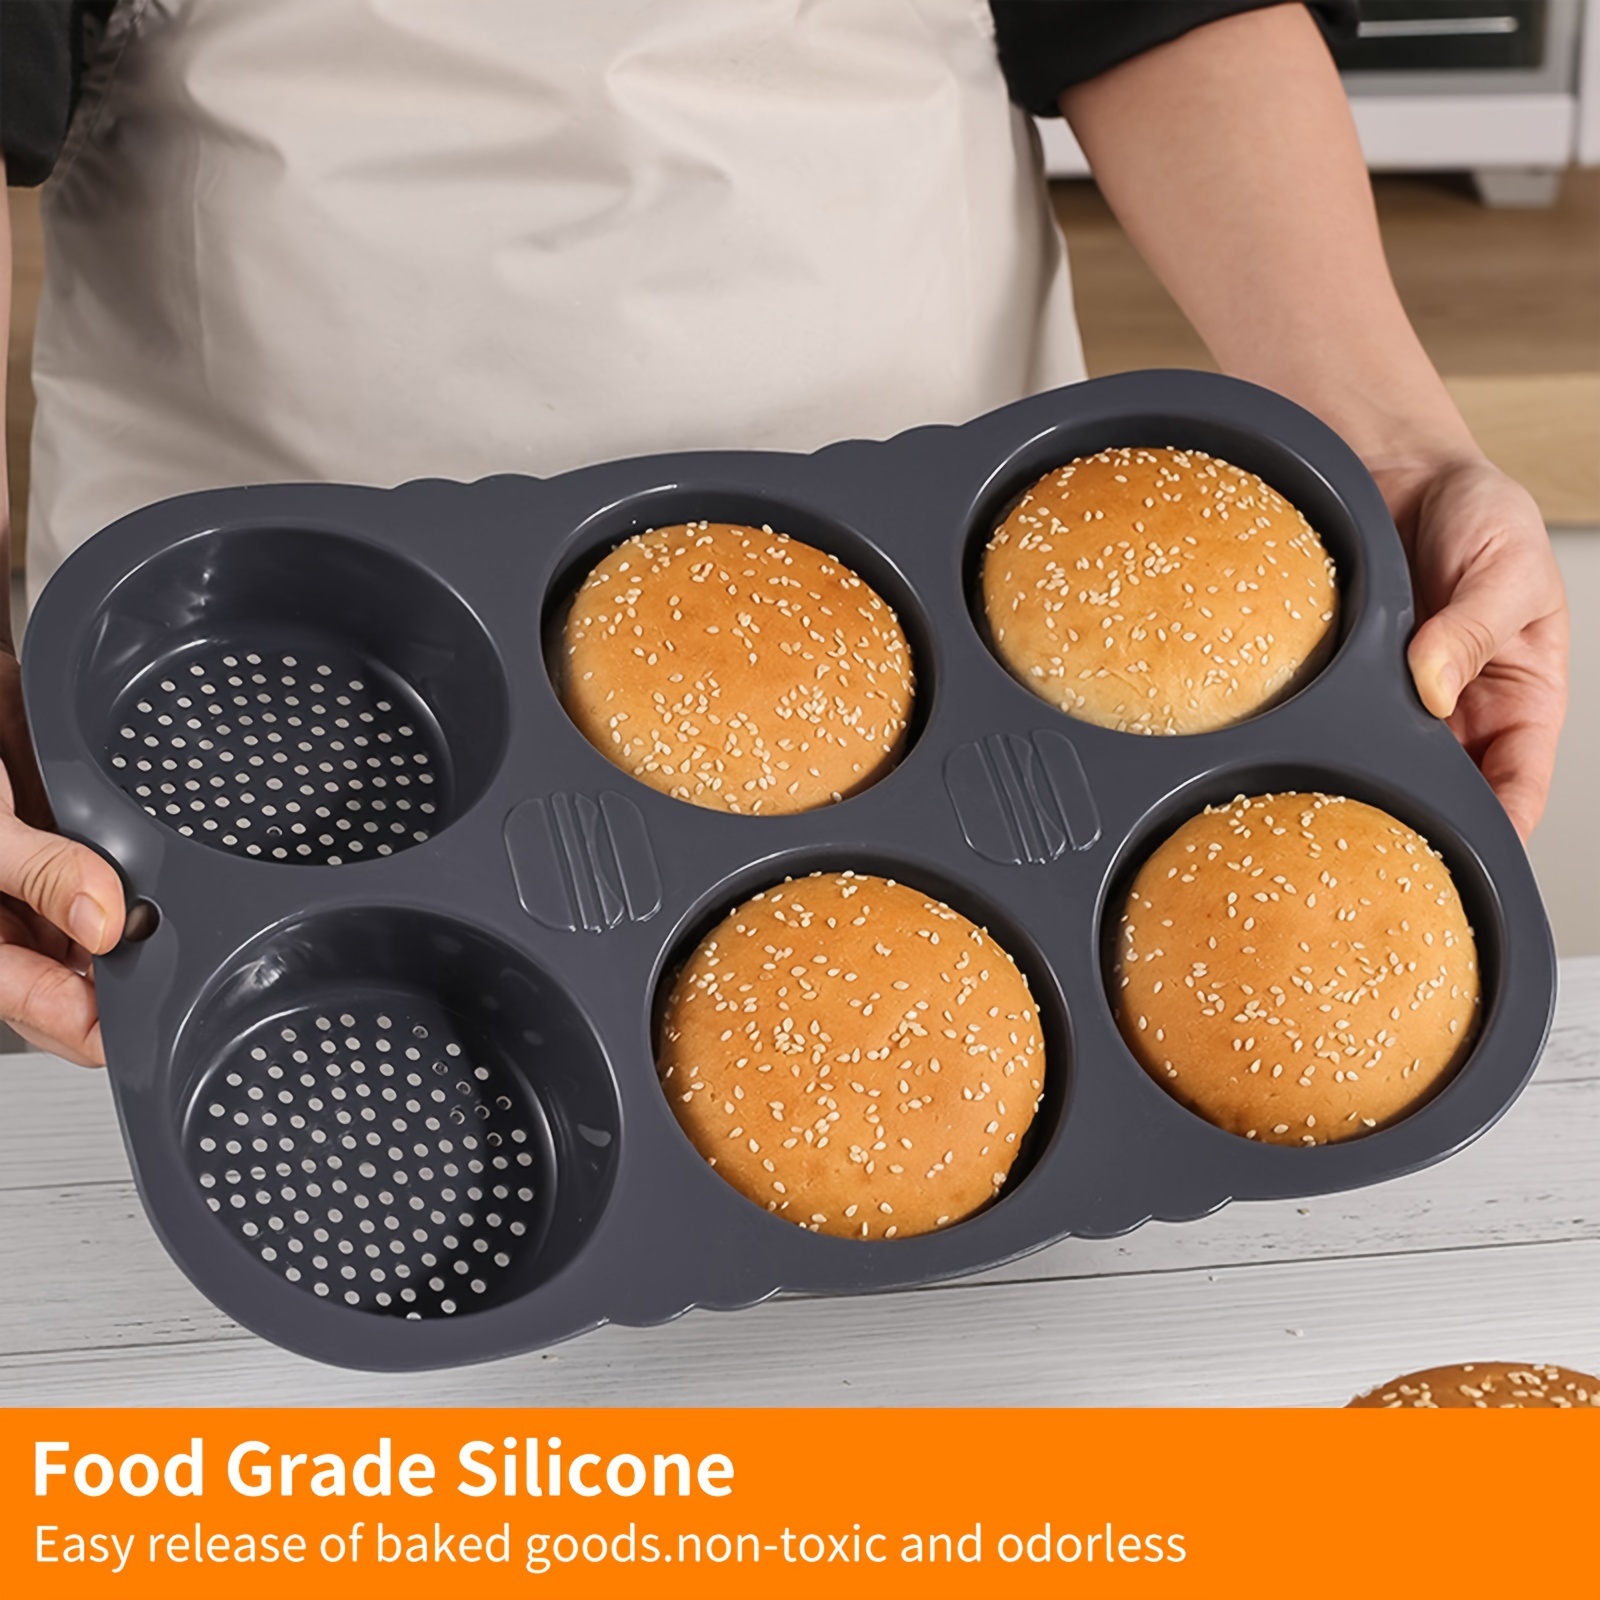 

1pc Silicone Hamburger Bun Mold - 6-cavity, Perforated Baking Pan For Better Airflow, Ideal For Cakes & Breads, Essential Kitchen Gadget